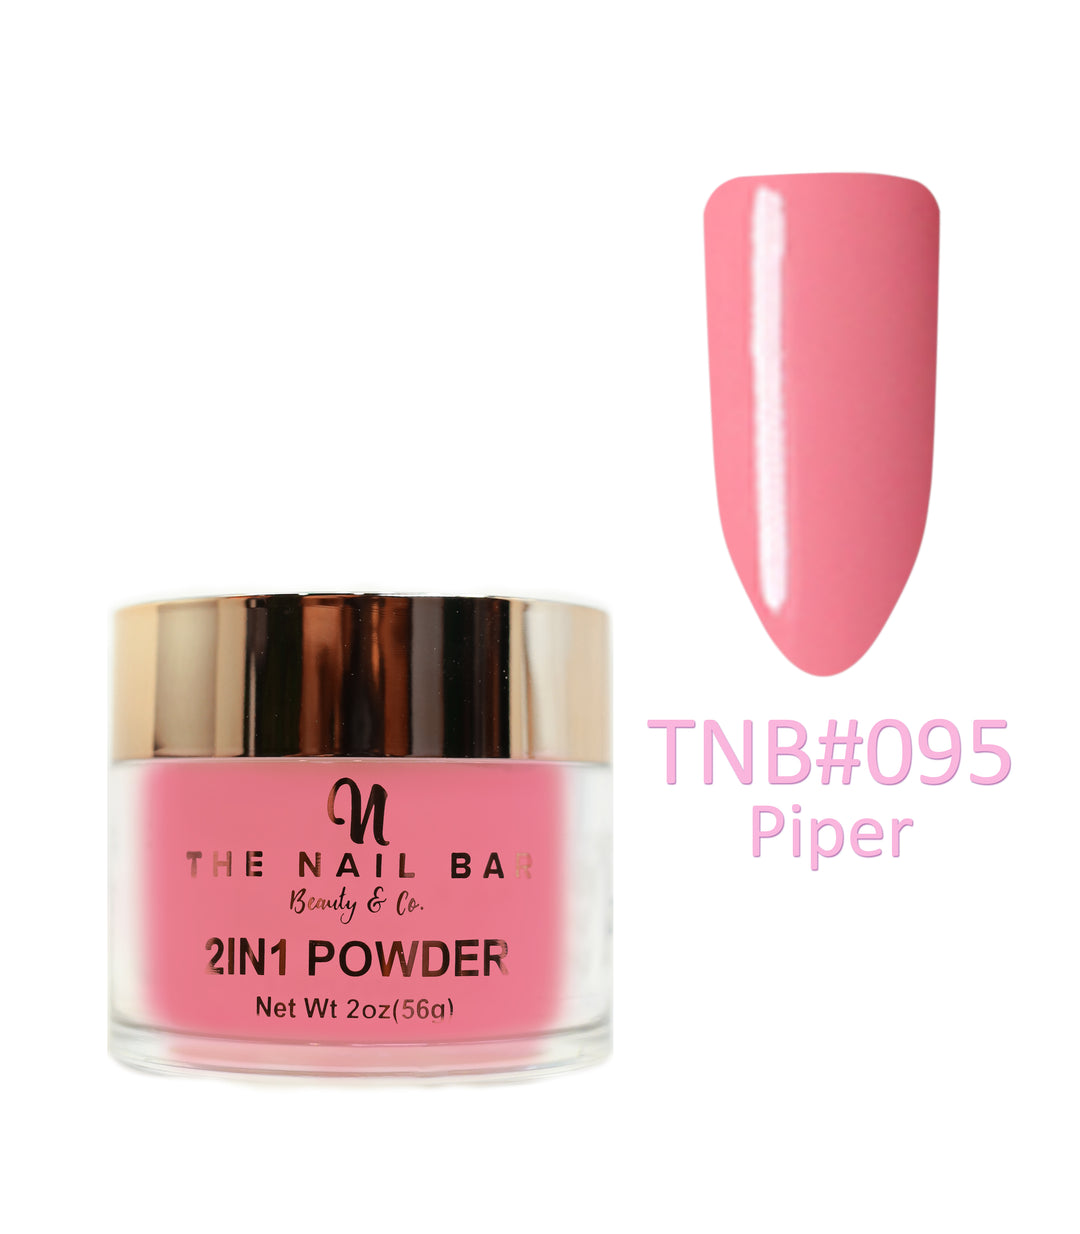 2-In-1 Dipping/Acrylic colour powder (2oz) -Piper - The Nail Bar Beauty & Co.